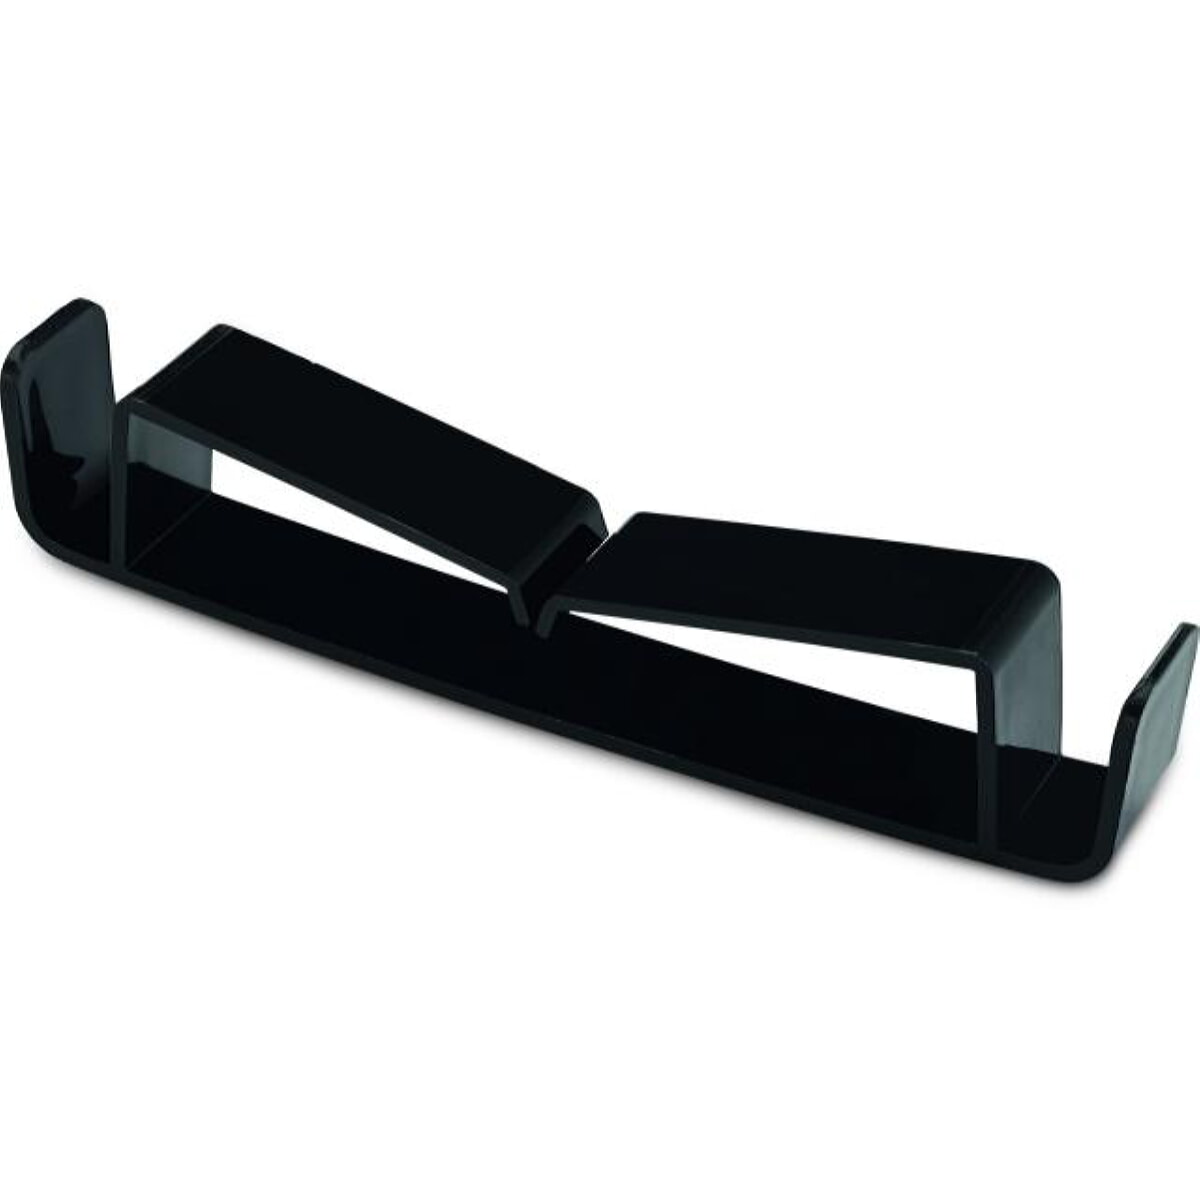 Novotegra cable holder for flat roof base rail